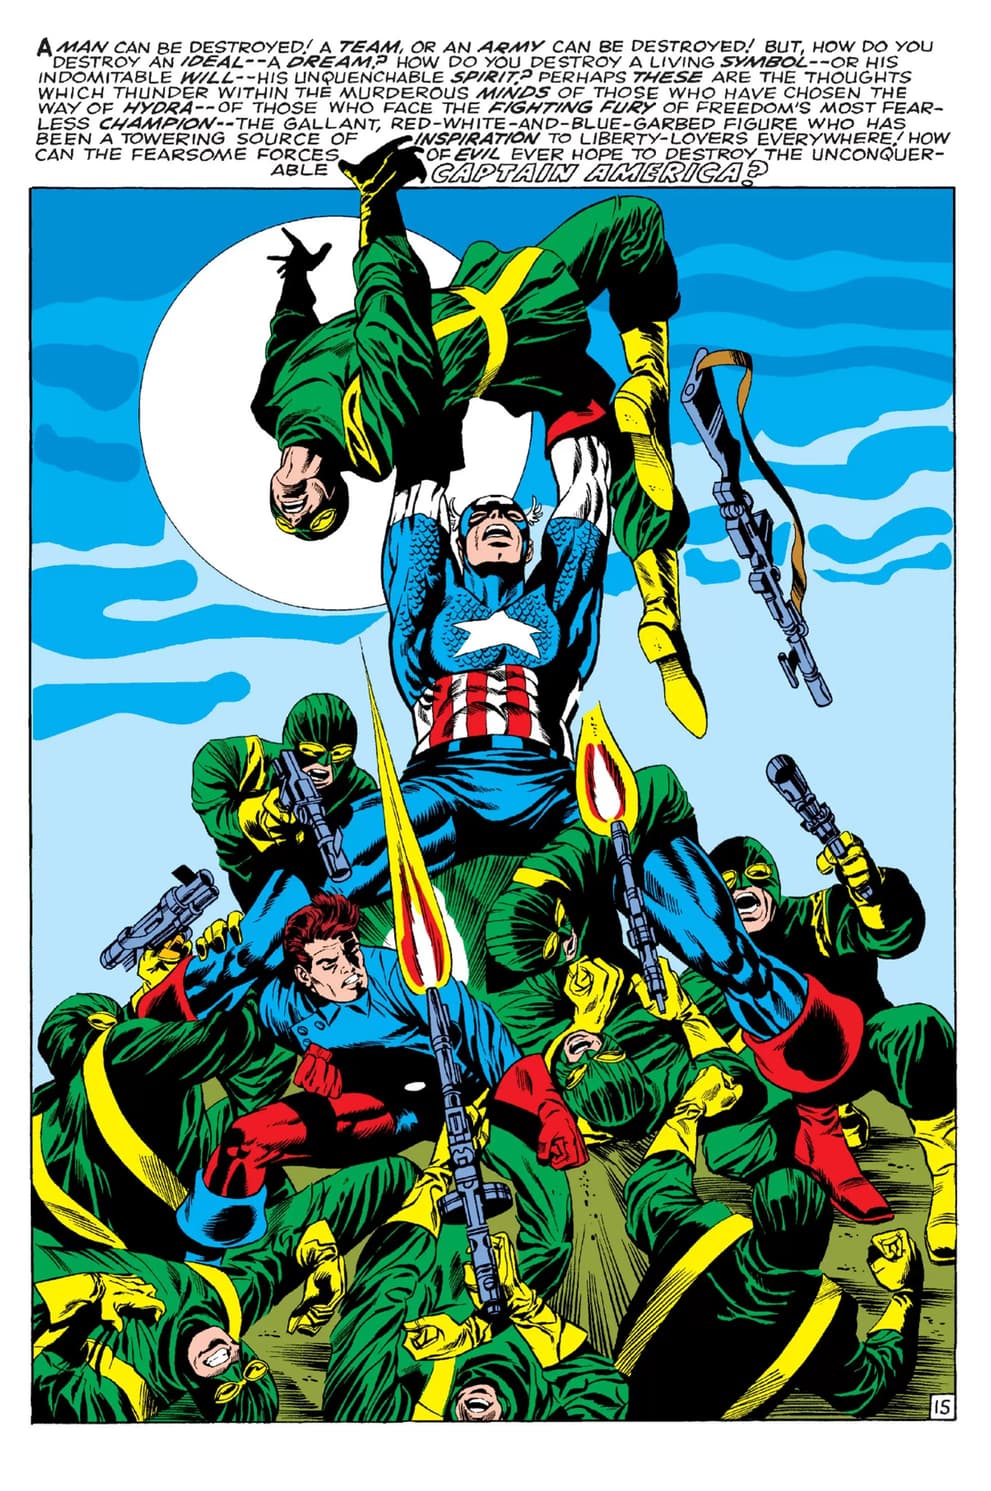 CAPTAIN AMERICA (1968) #113 page by Stan Lee and Jim Steranko